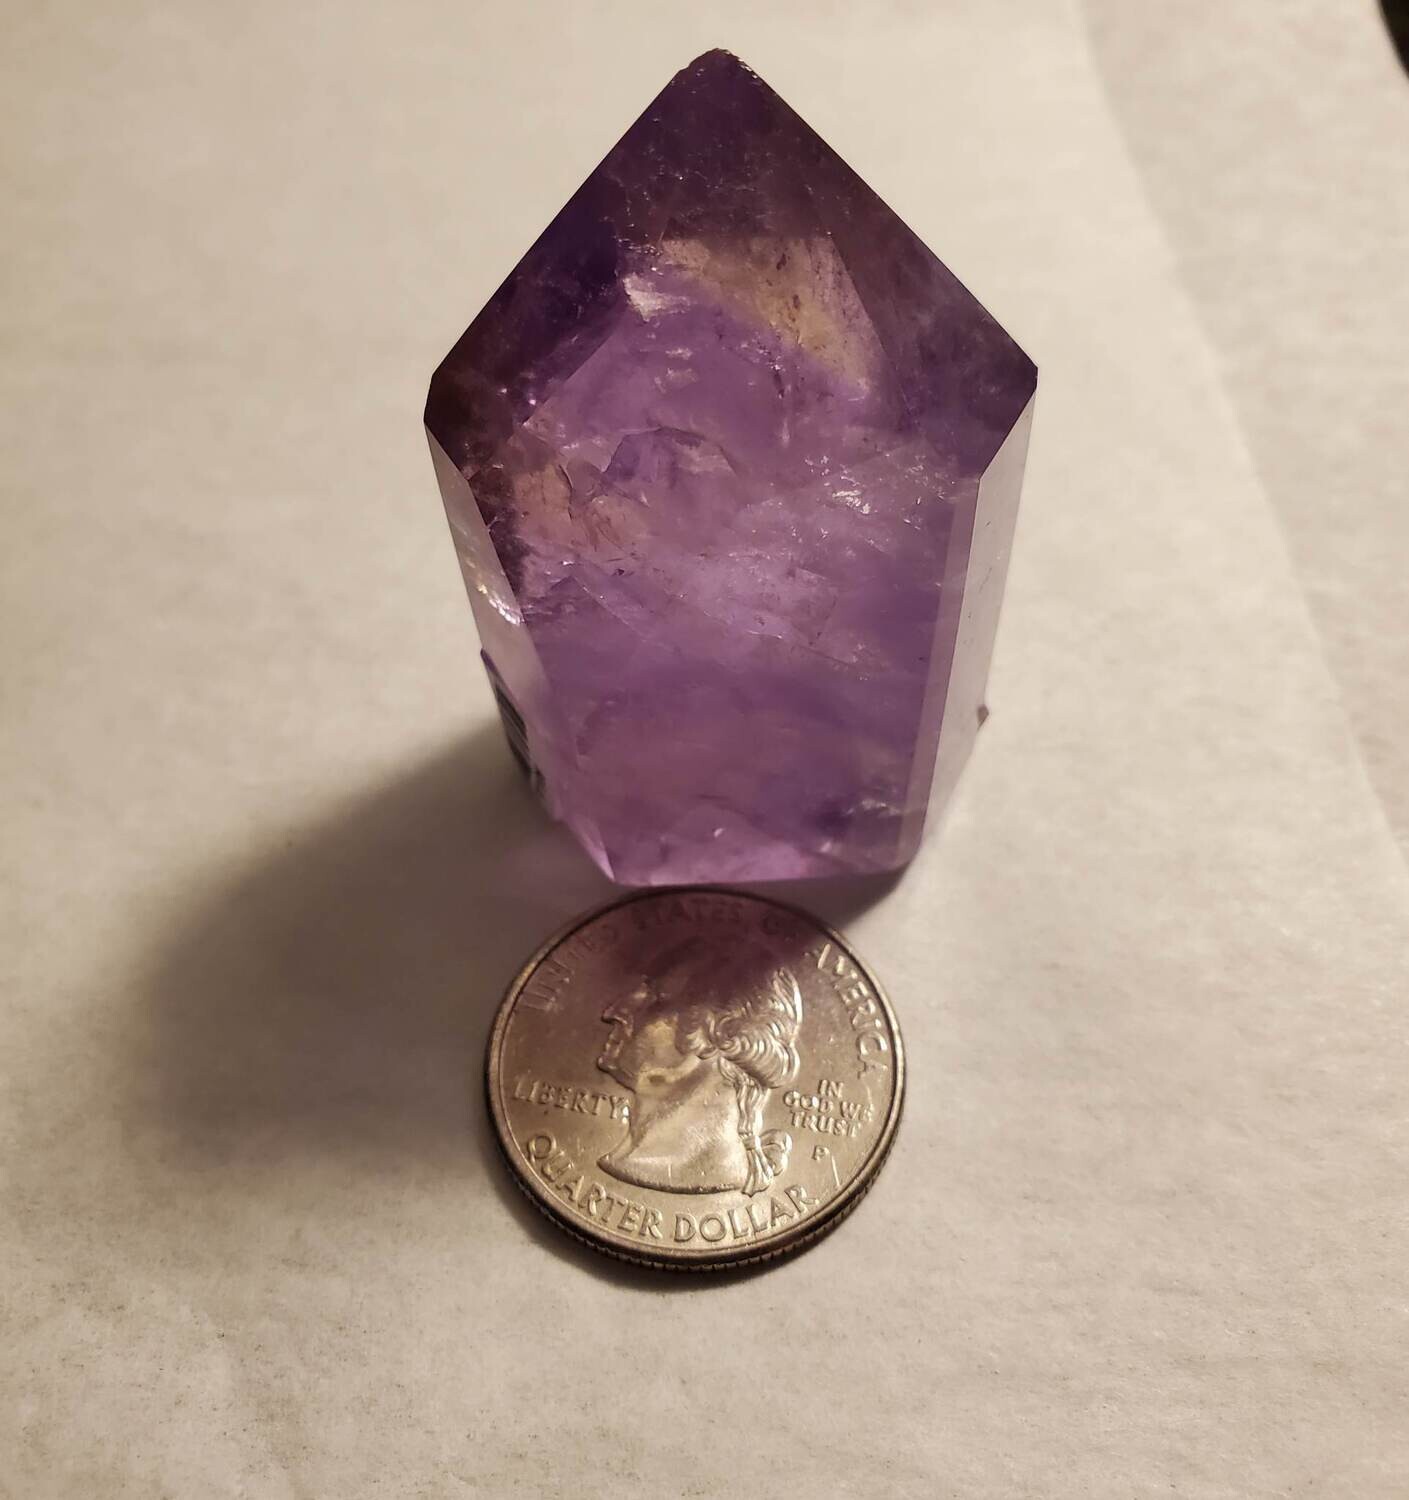 Crystal/Mineral Ametrine Standing Point